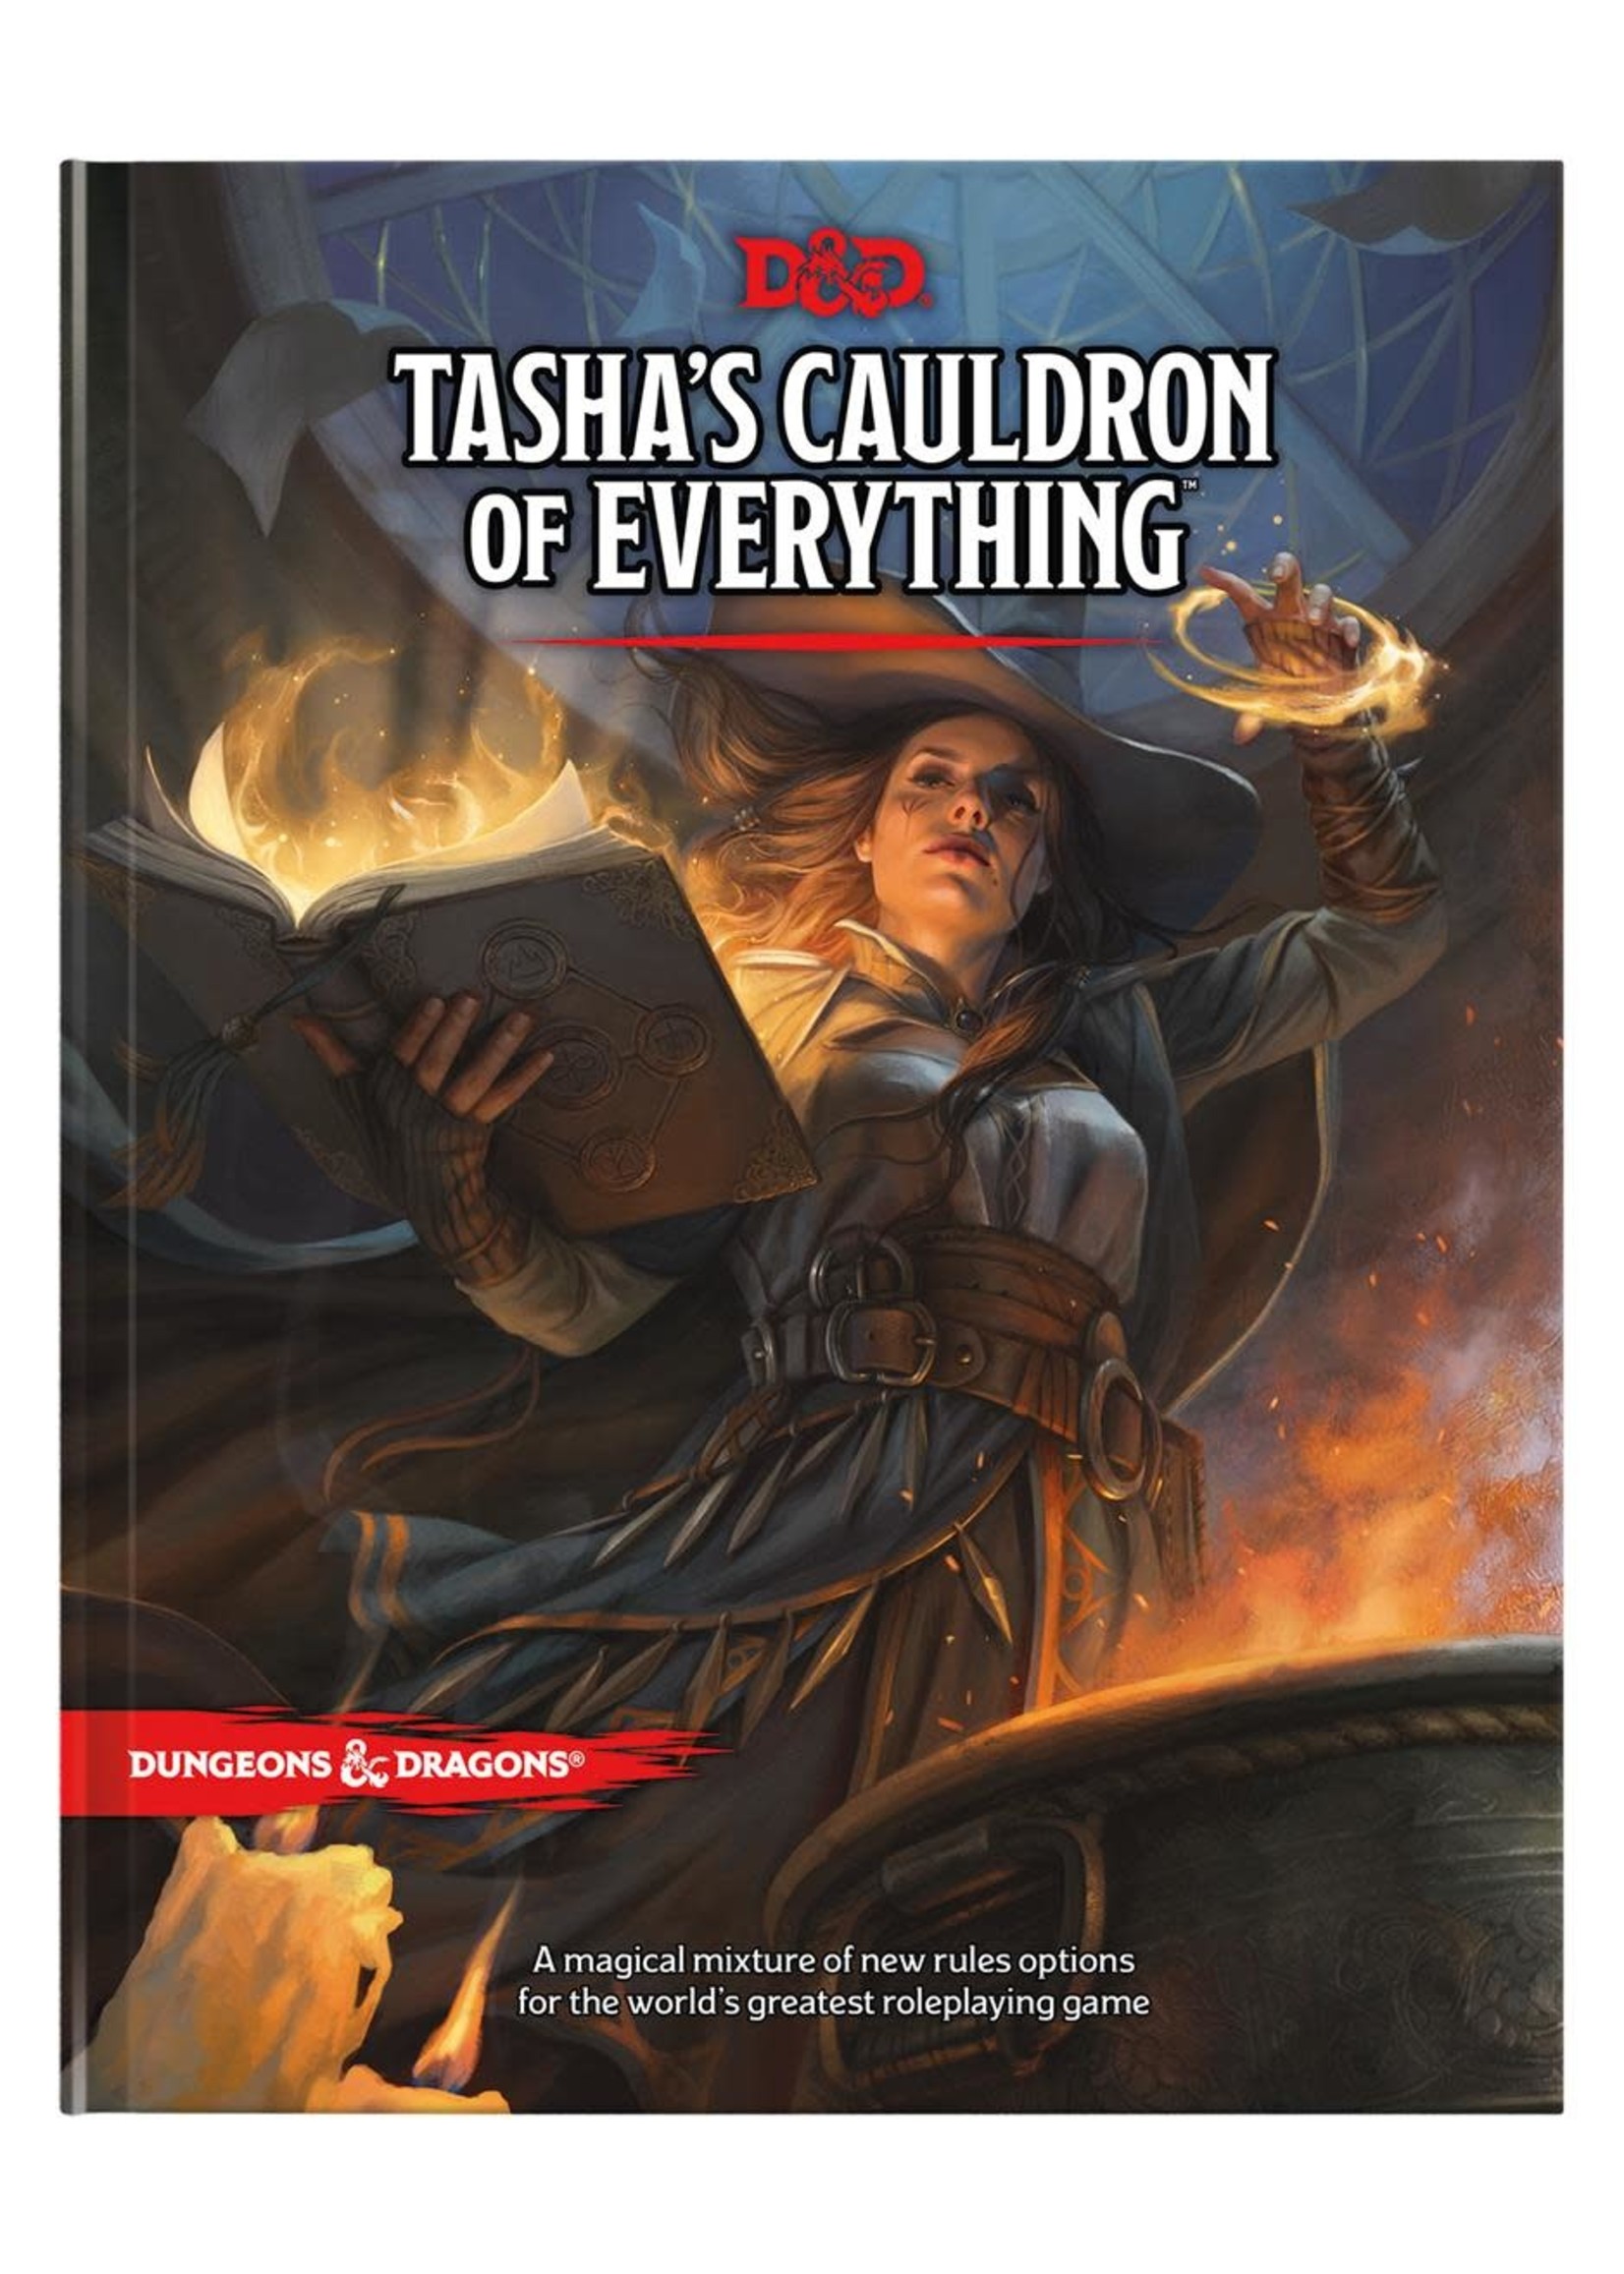 Tasha's Cauldron of Everything (Dungeons & Dragons 5th Ed.) by Wizards RPG Team